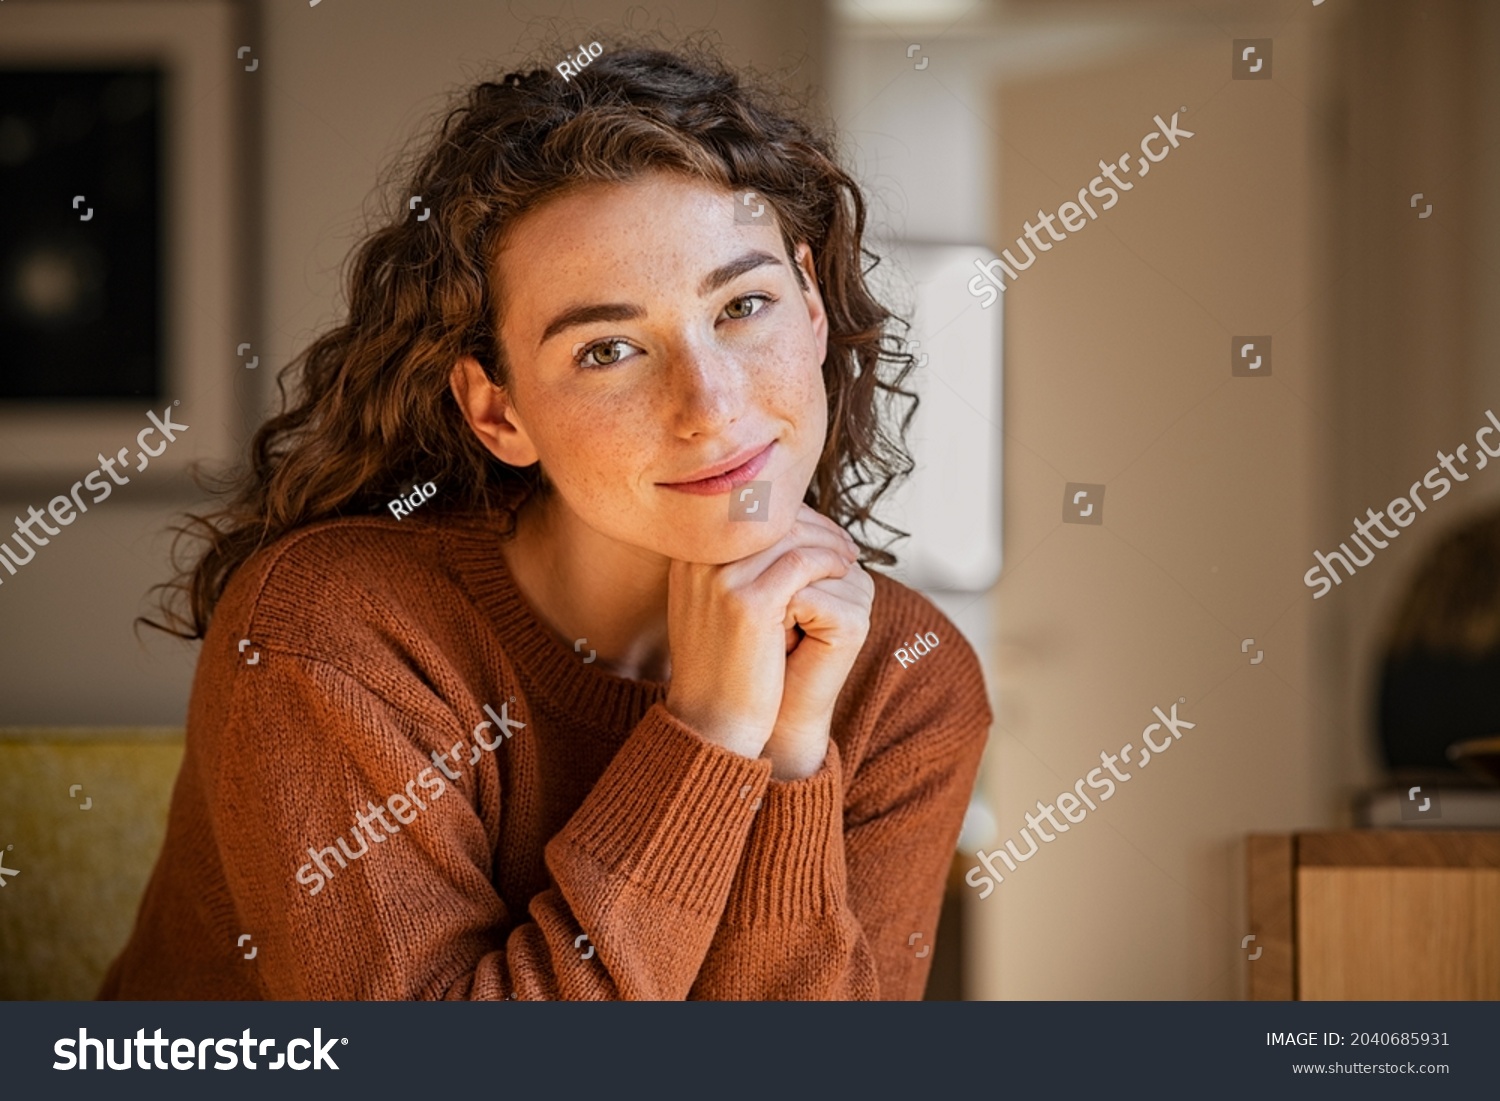 Portrait of satisfied young woman relaxing at home. Successful woman with hand on chin smiling and looking at camera. Beautiful natural girl stay at home with a serene expression. #2040685931